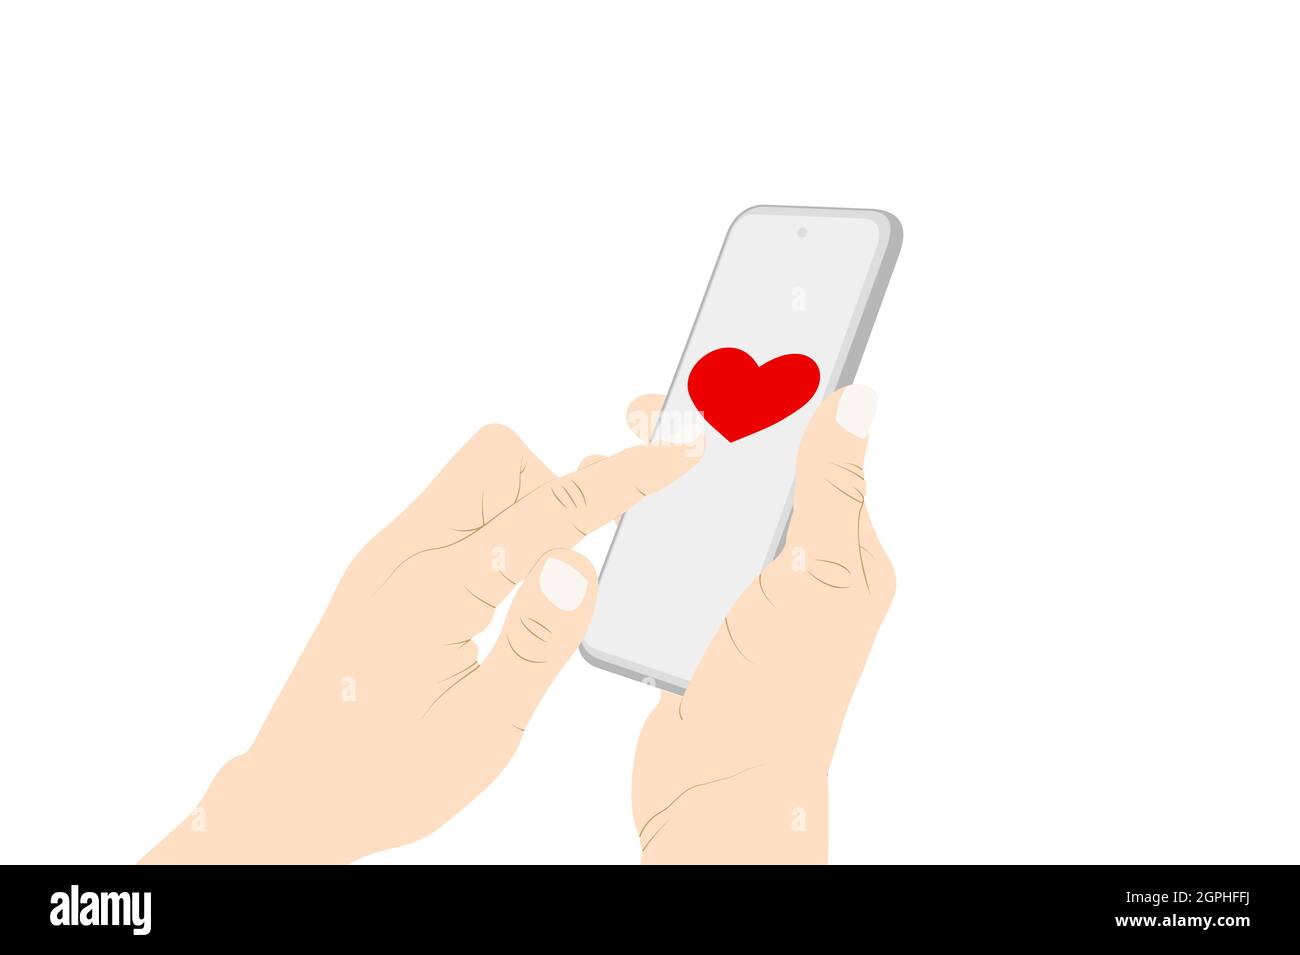 Sending heart emoji with phone, flirting, heart symbol, woman hand sending a message with phone. Vector stock illustration Stock Vector